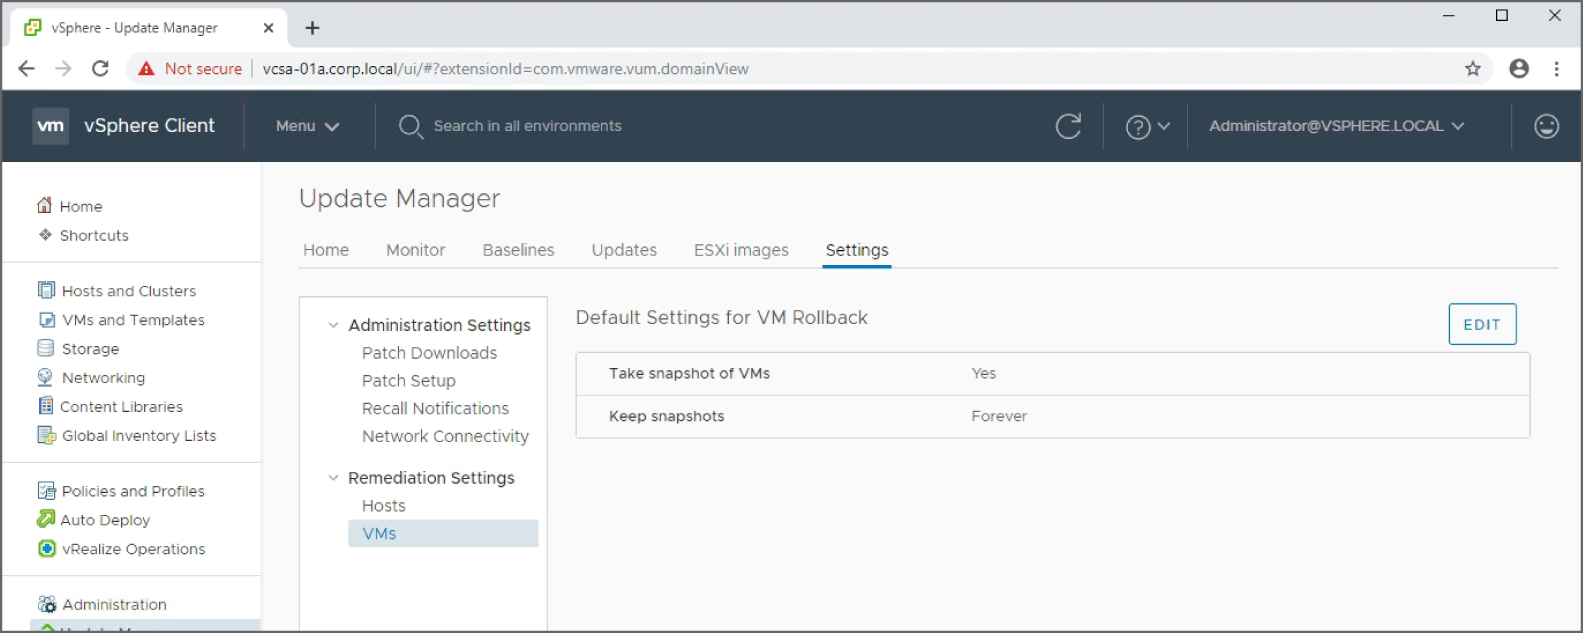 Snapshot of changing the settings for VM remediation.